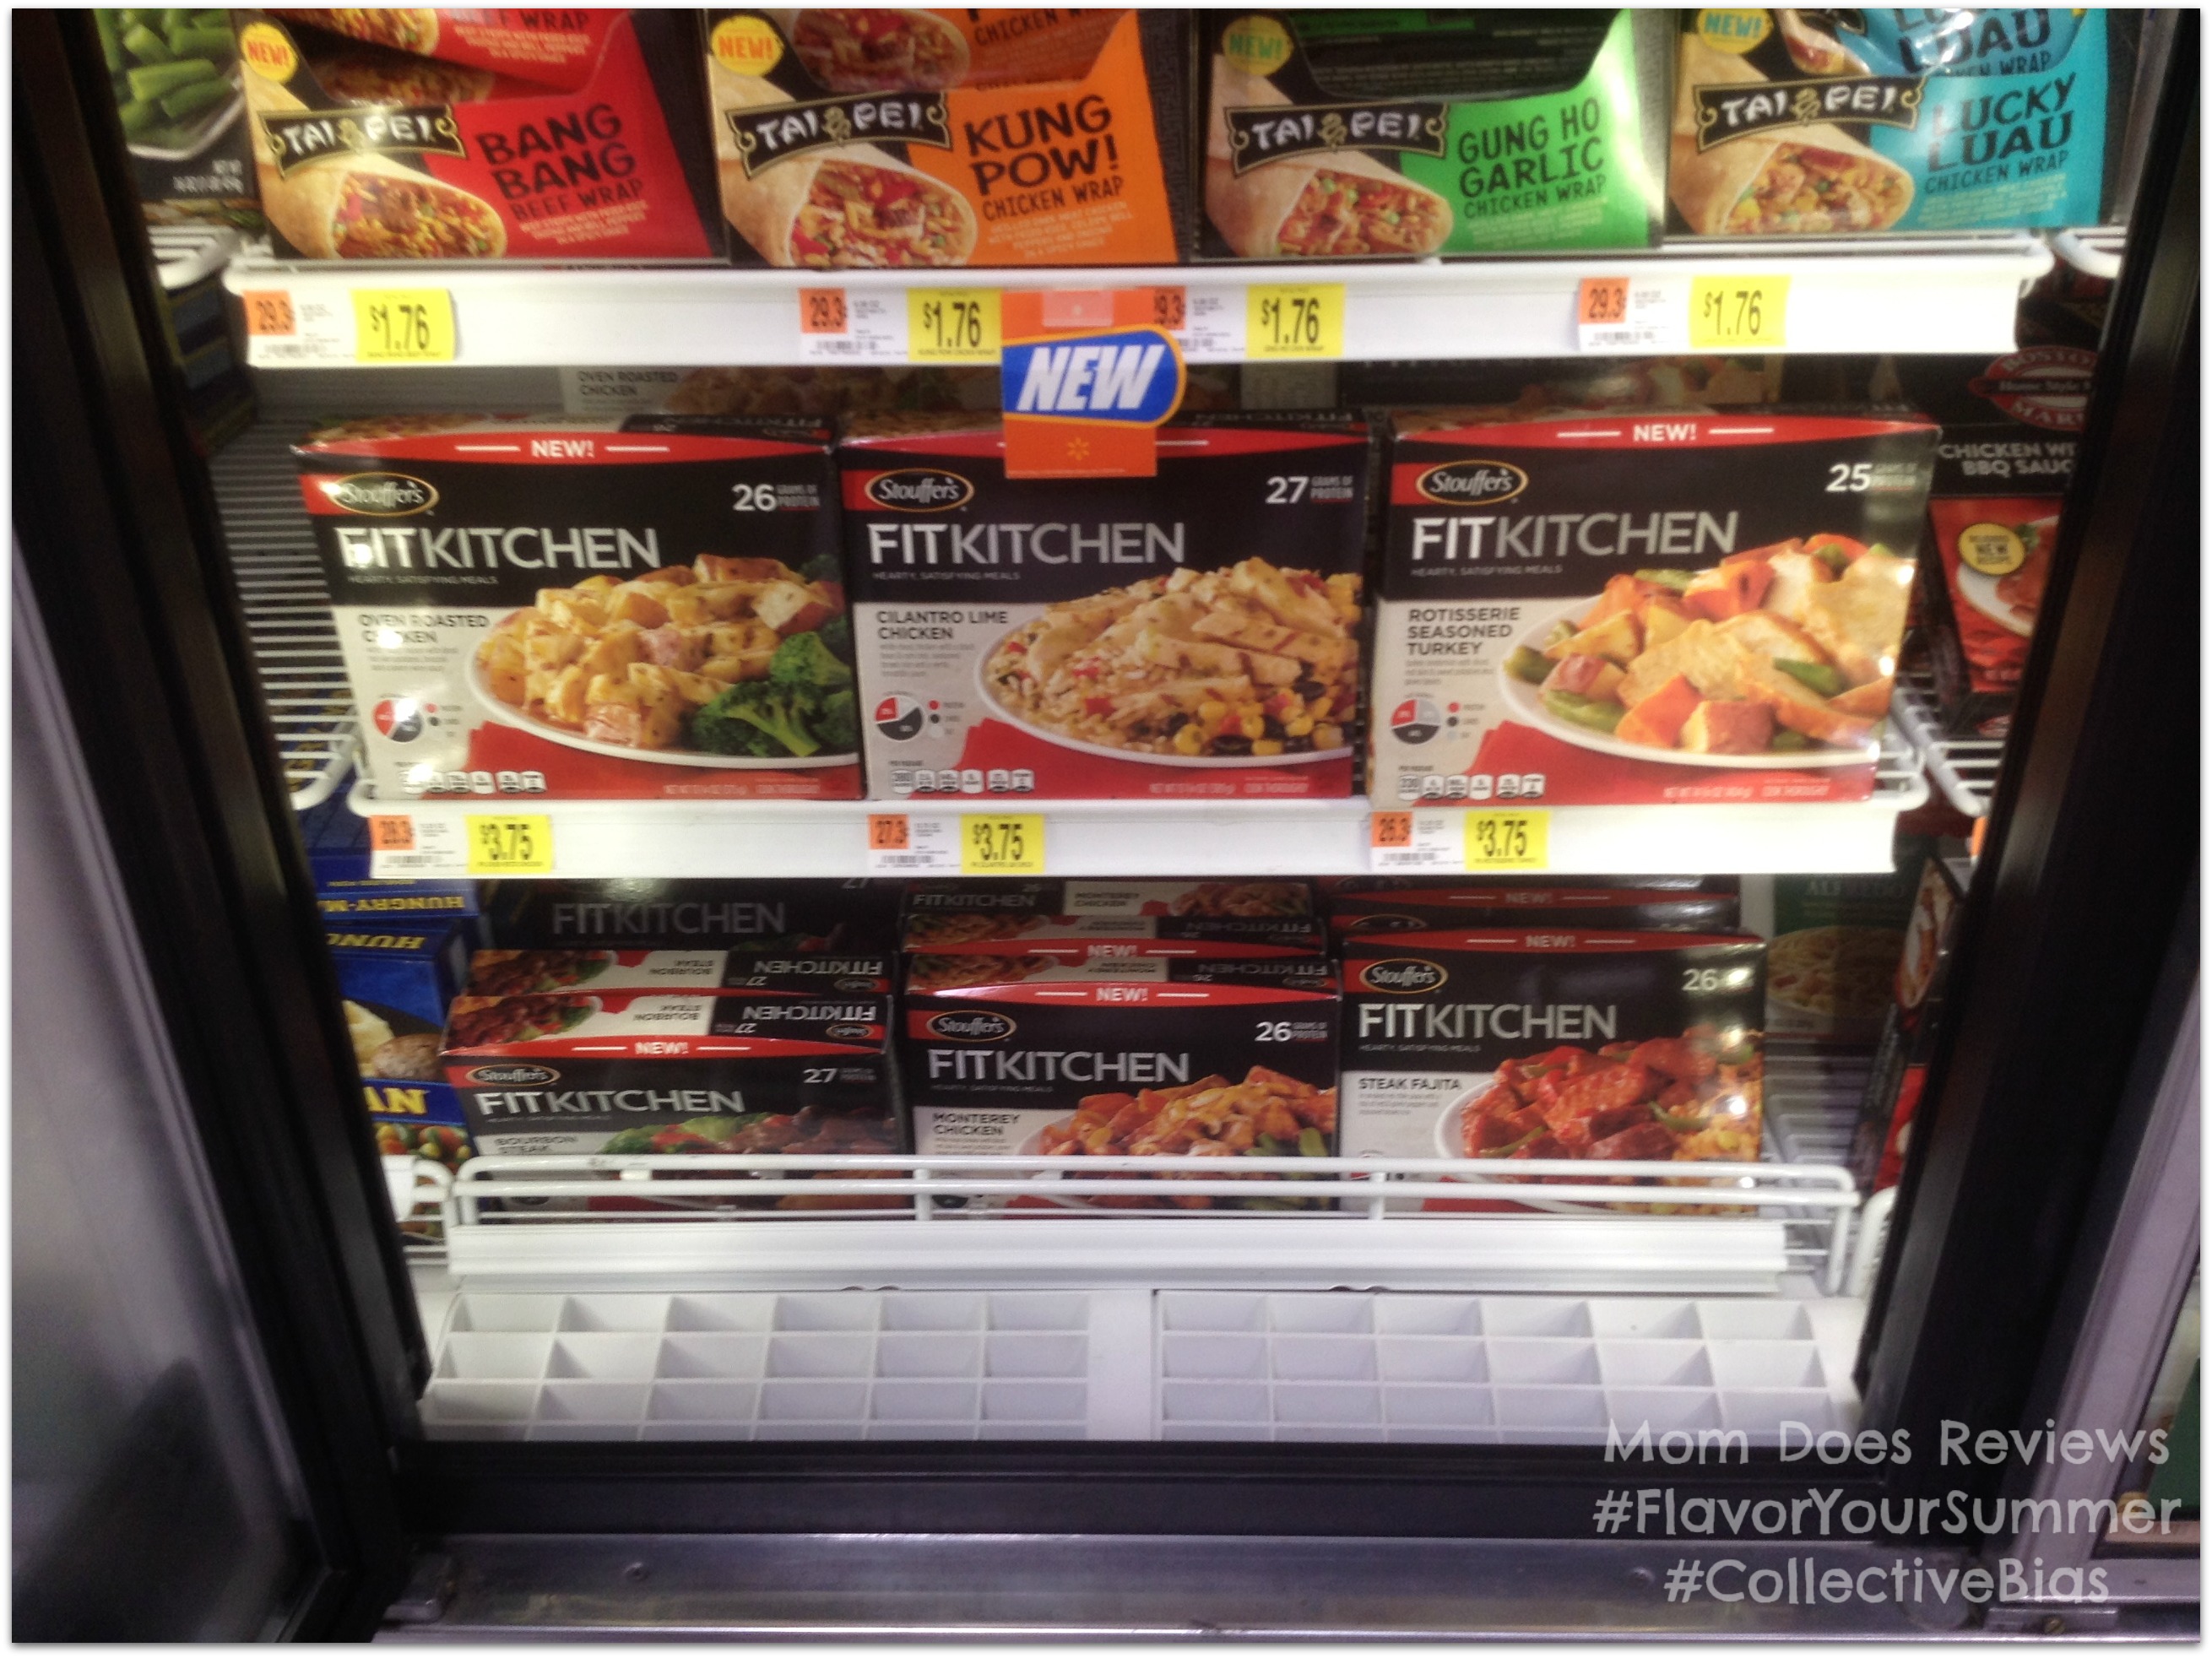 Stouffer's FitKitchen in the Frozen Food Isle at Wal-Mart #FlavorYourSummer #CollectiveBias #cbias #ad